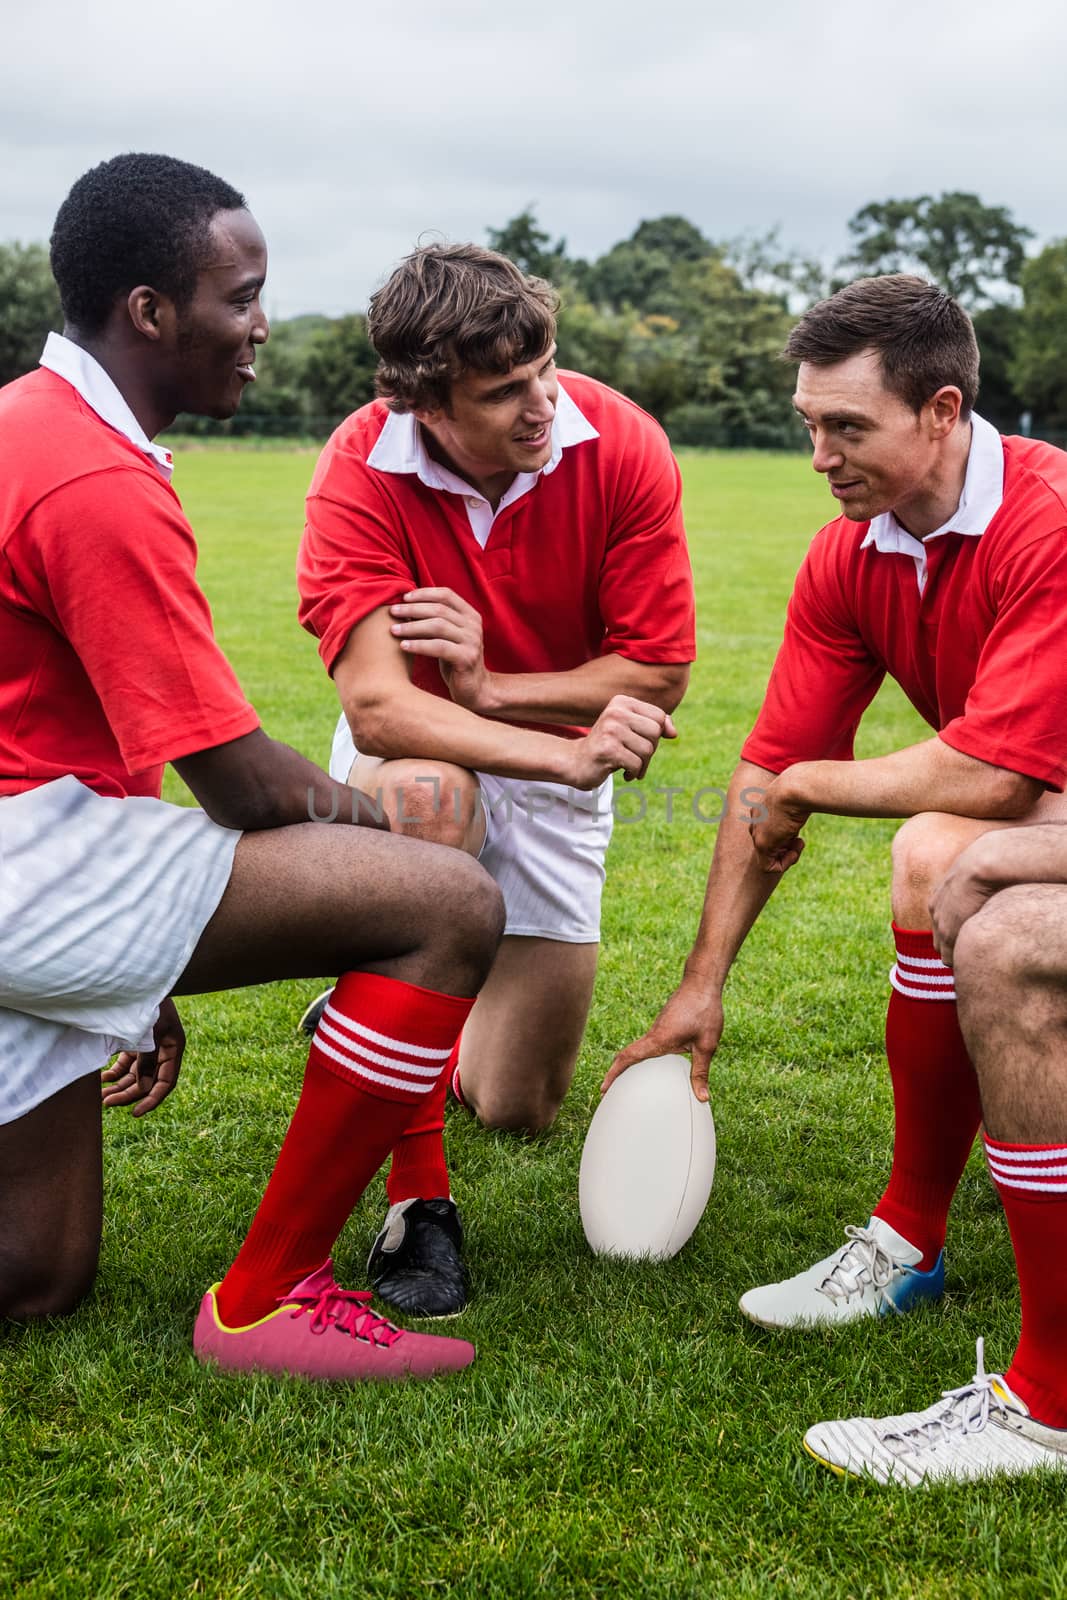 Rugby players discussing tactics before match at the park